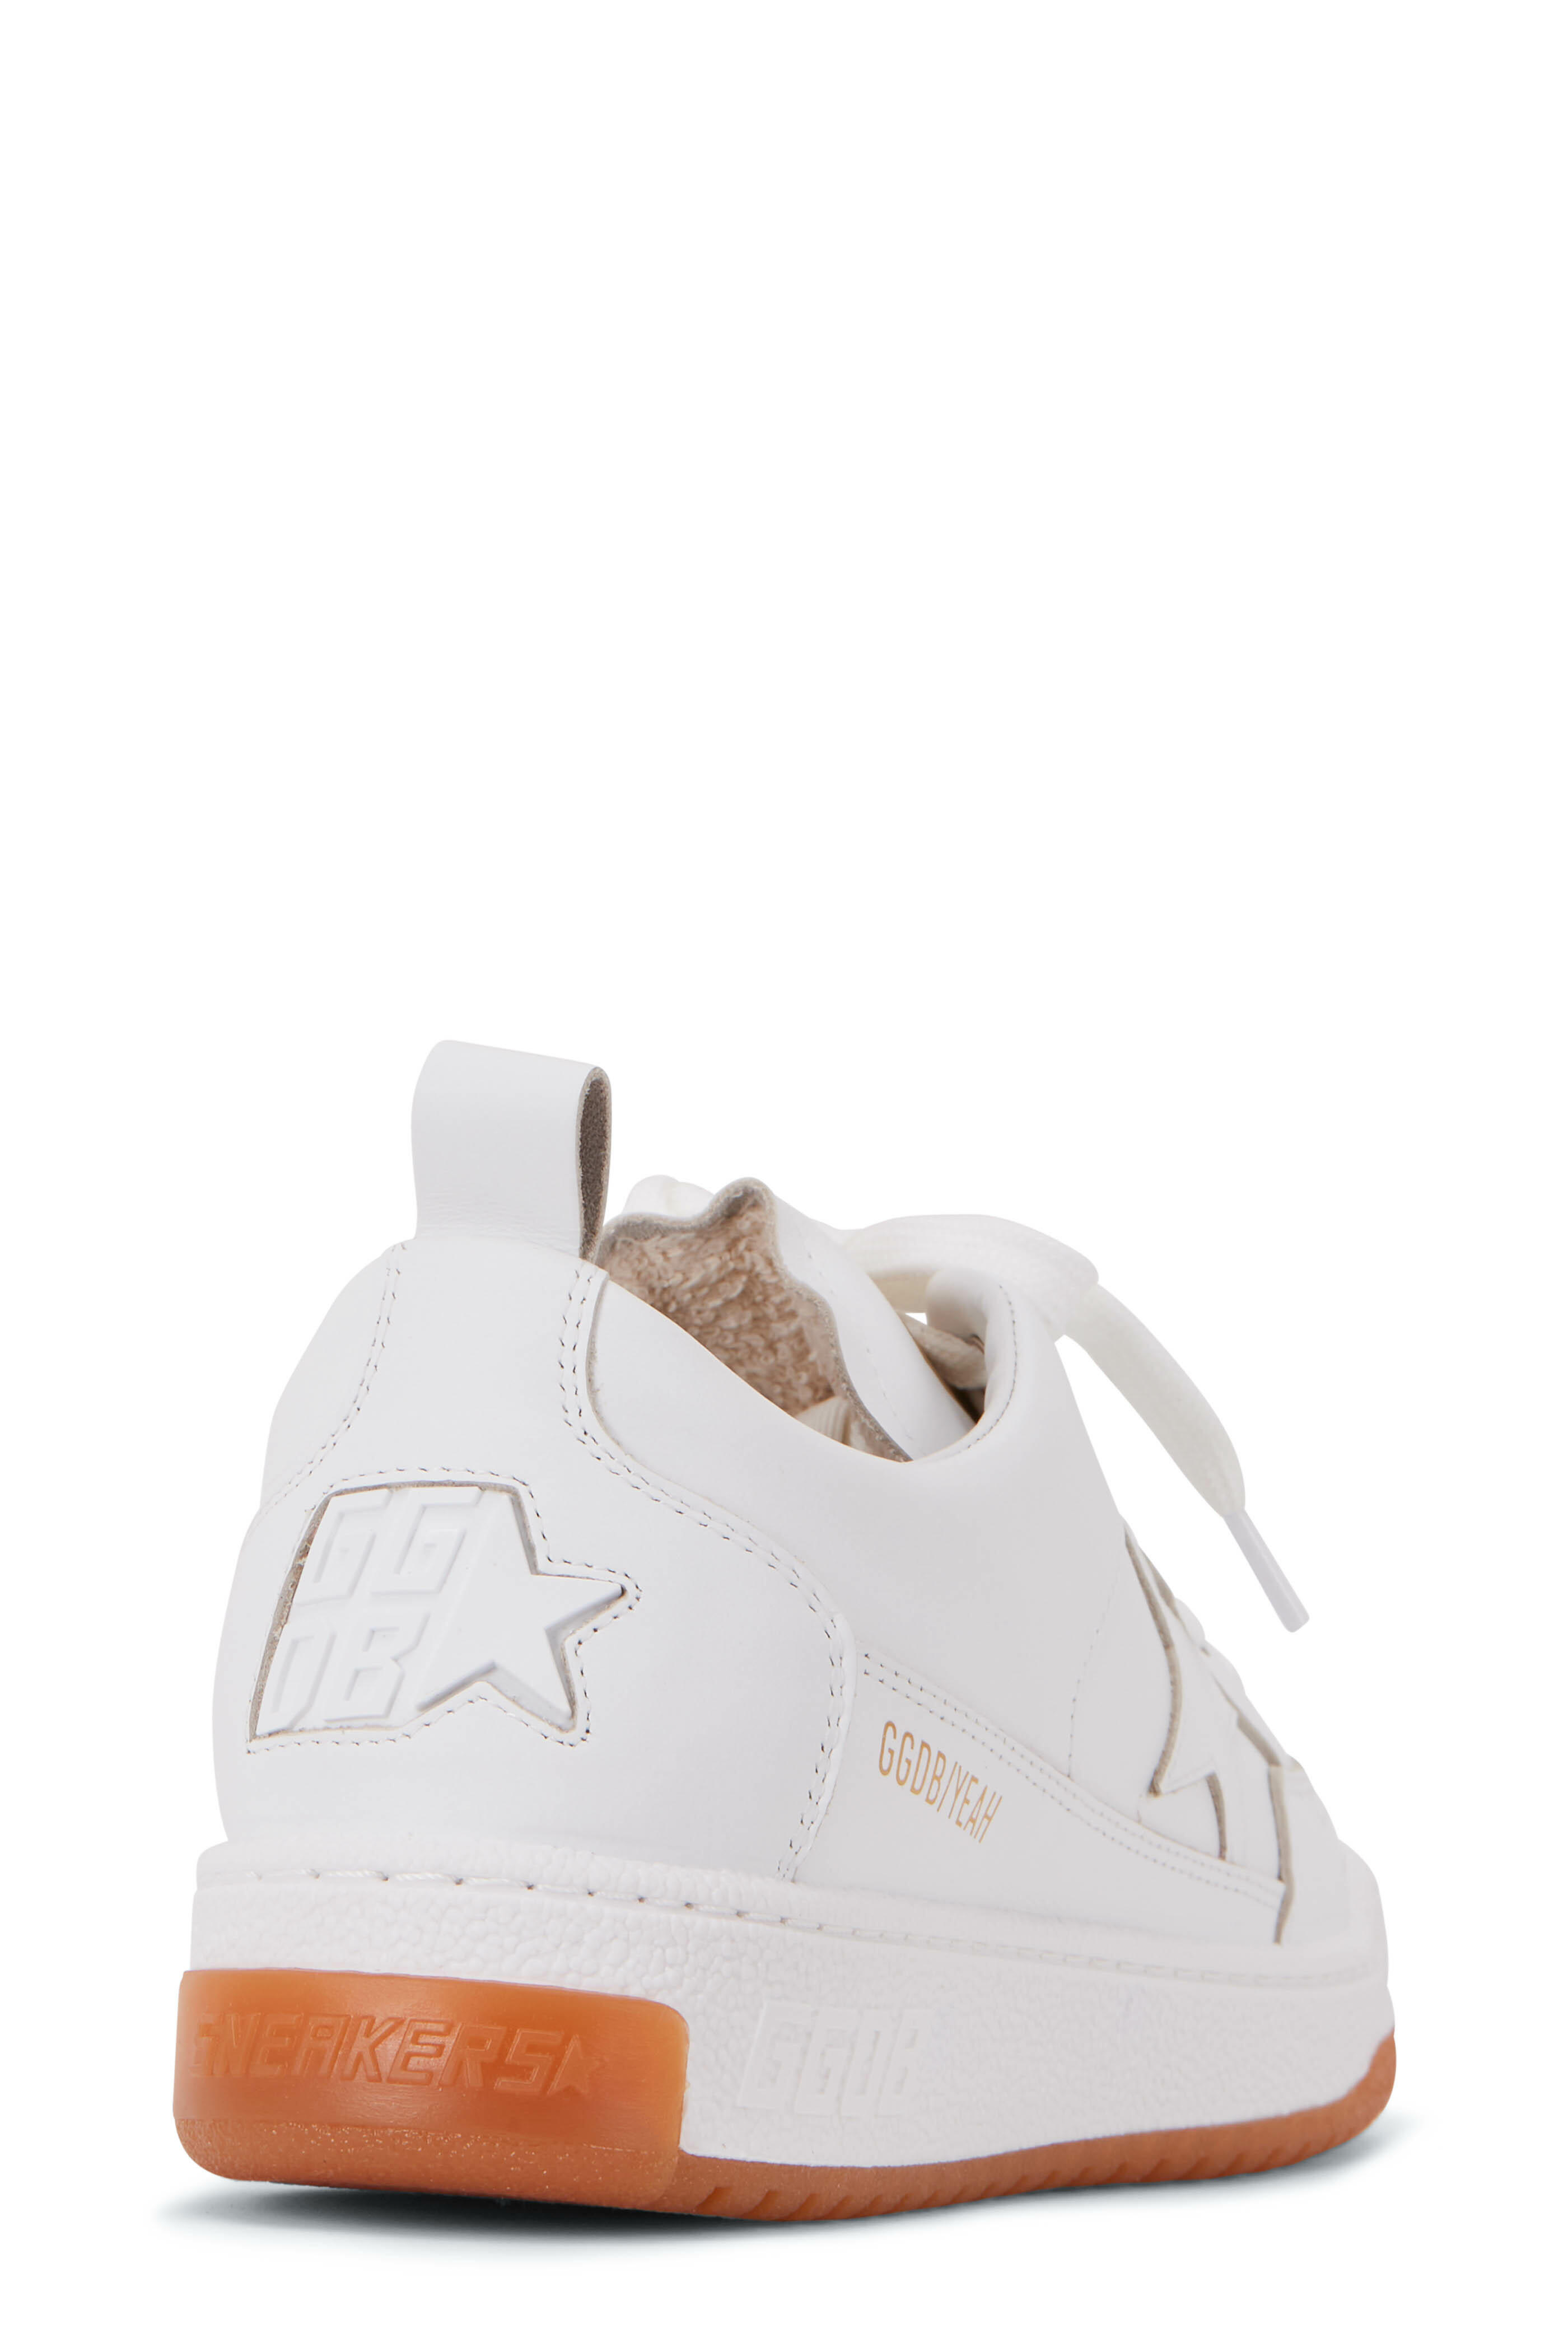 Golden Goose - Yeah! White Leather Low-Top Sneaker